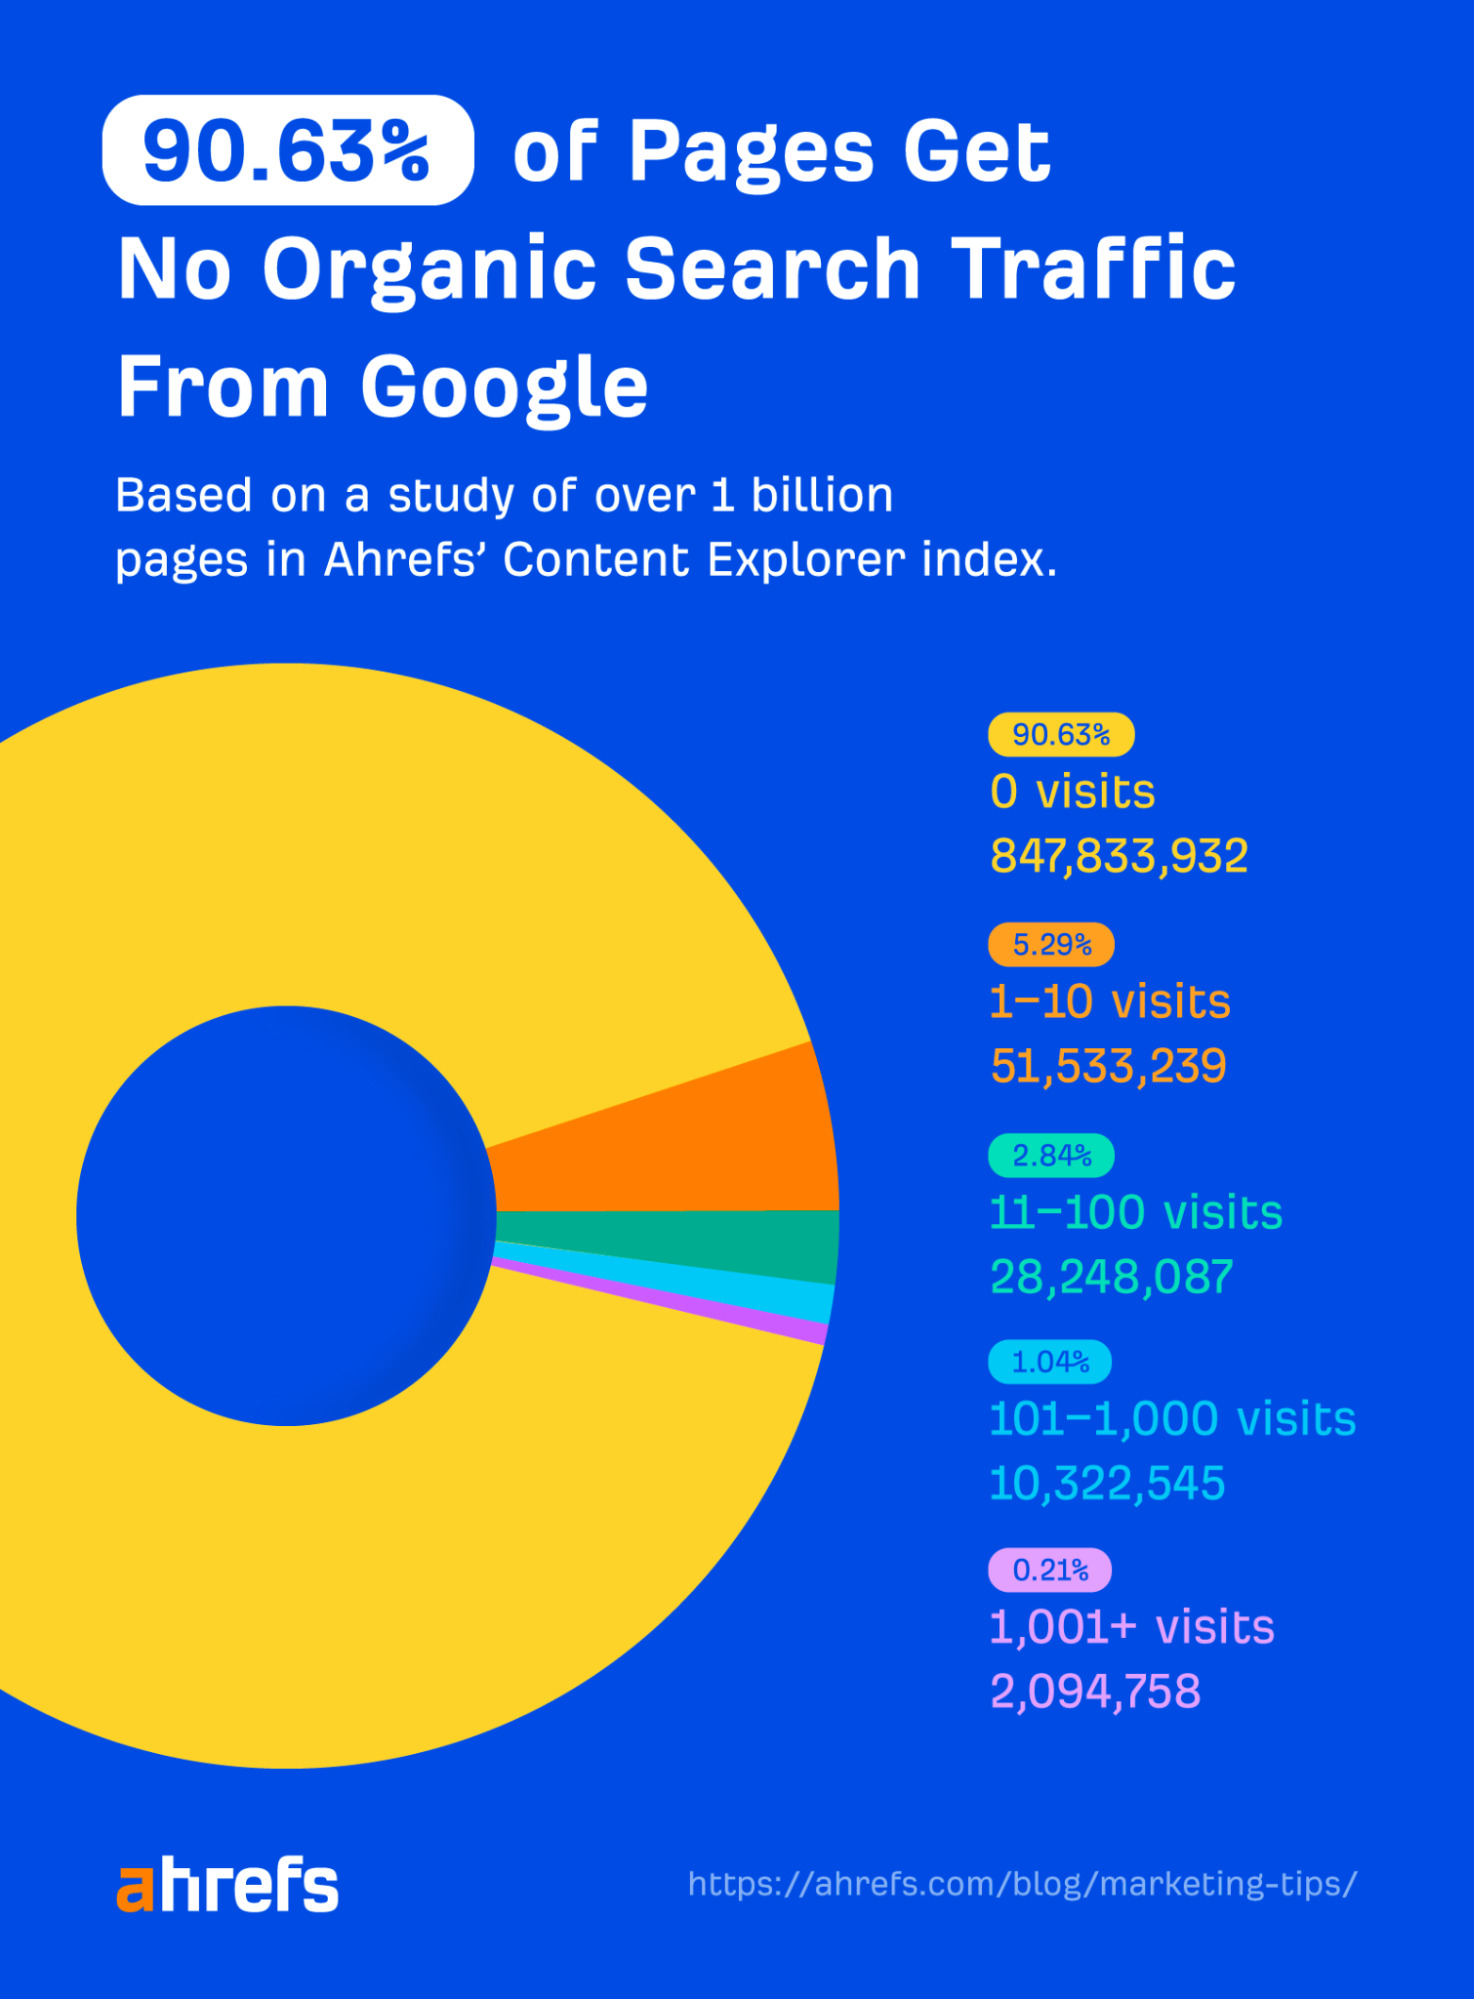 90.63% of pages gets zero traffic from Google, according to an Ahrefs study